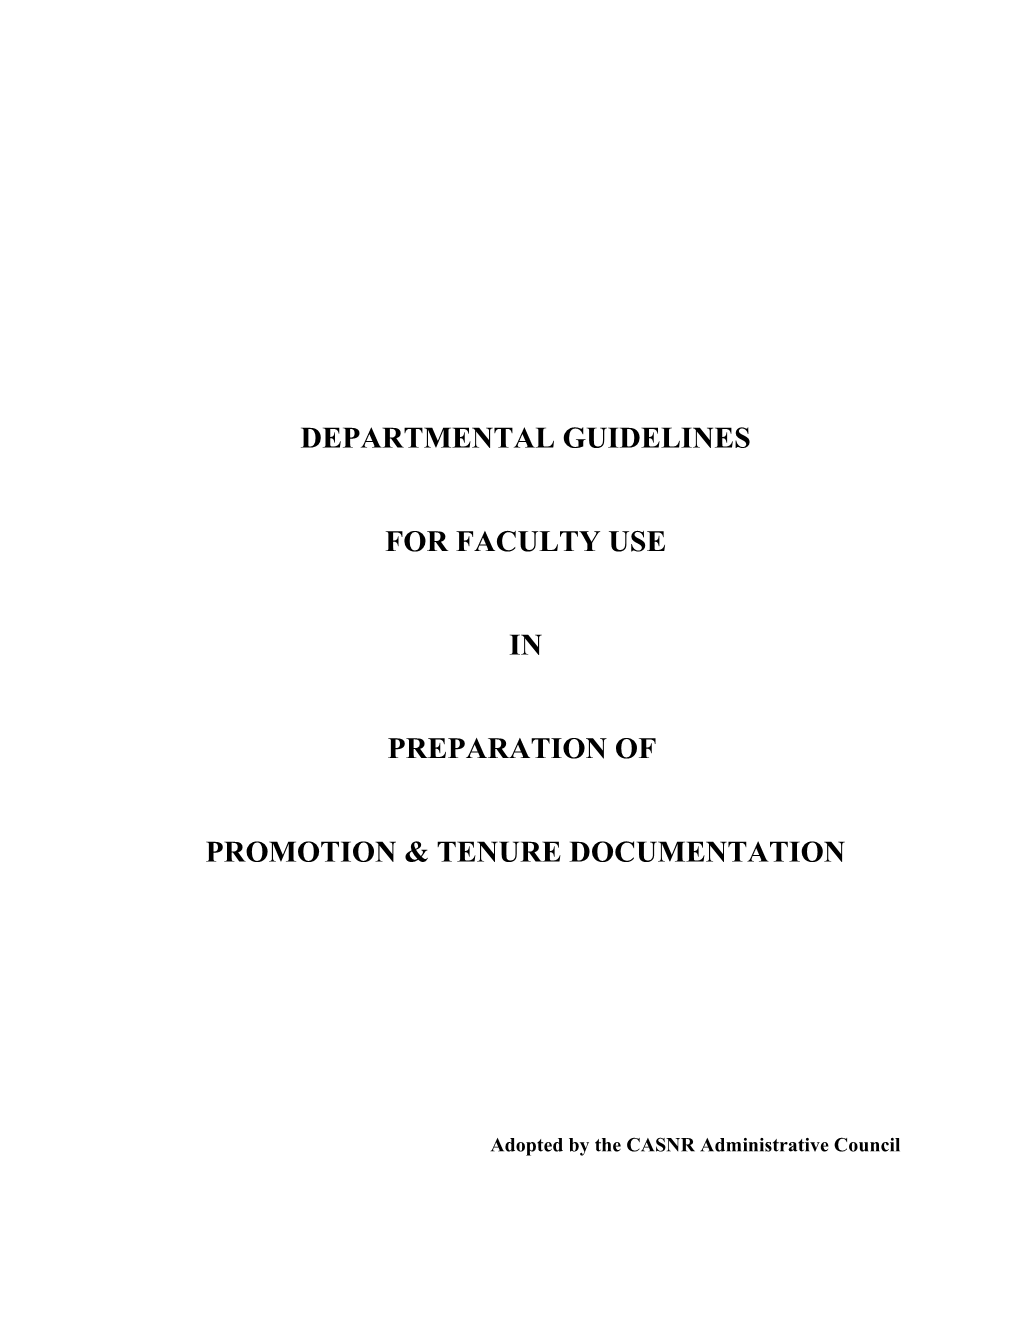 Preparation of Promotion and Tenure Documentation (Updated January __, 2007)